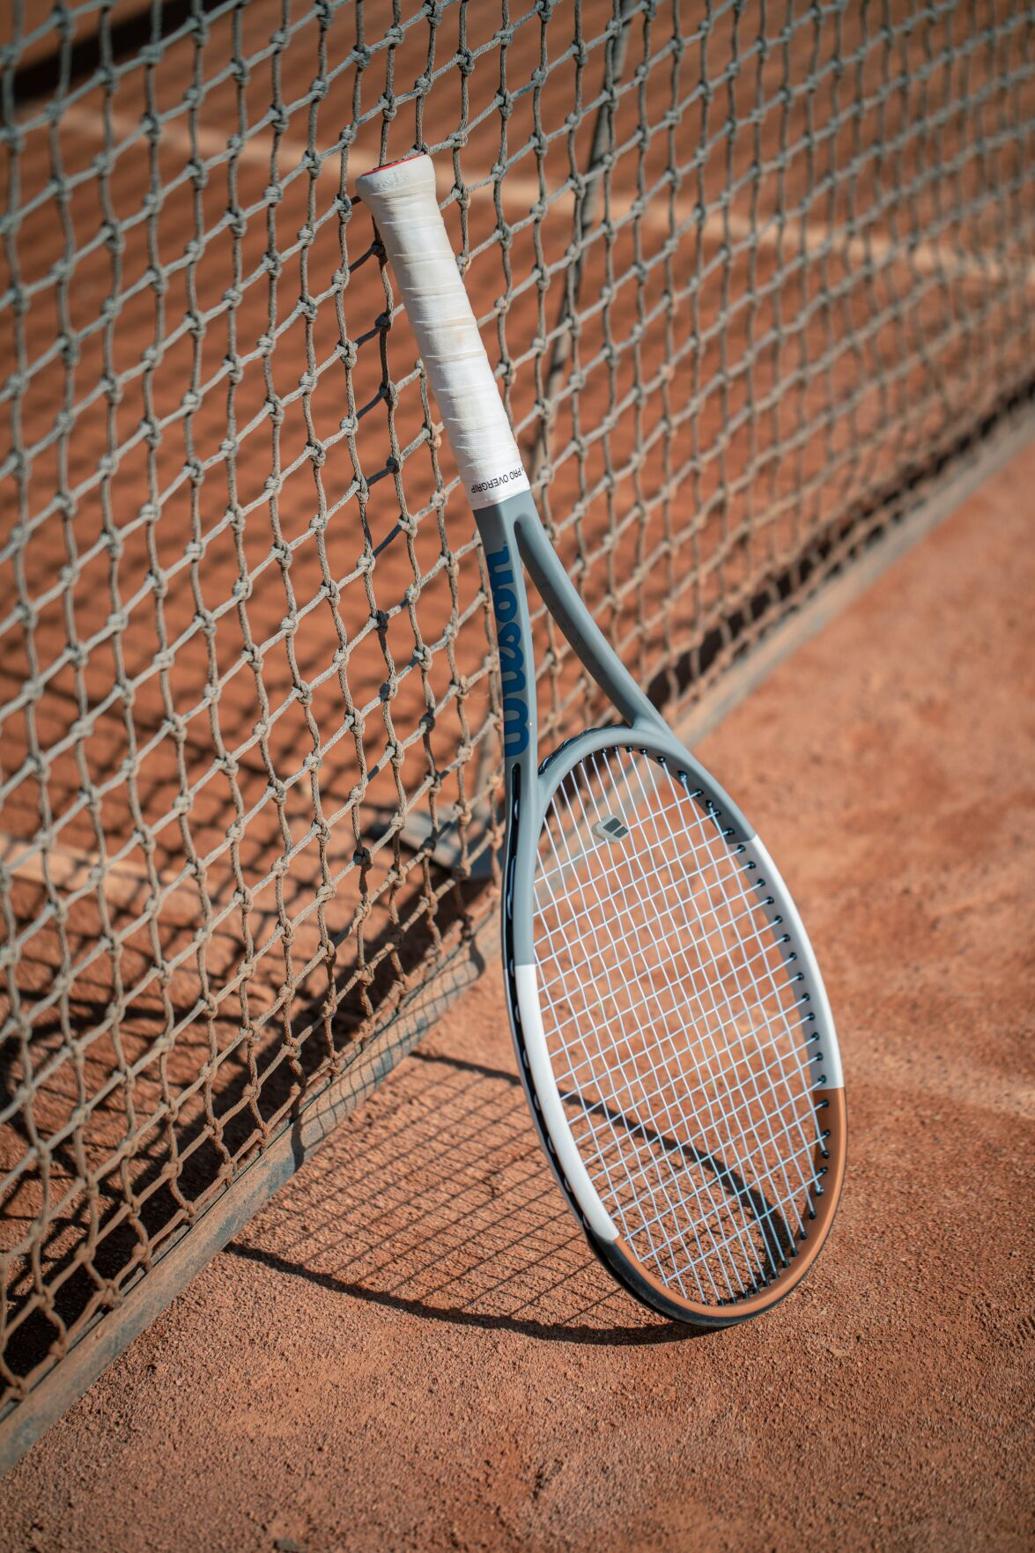 Jacksonville offers free tennis lessons for youth News